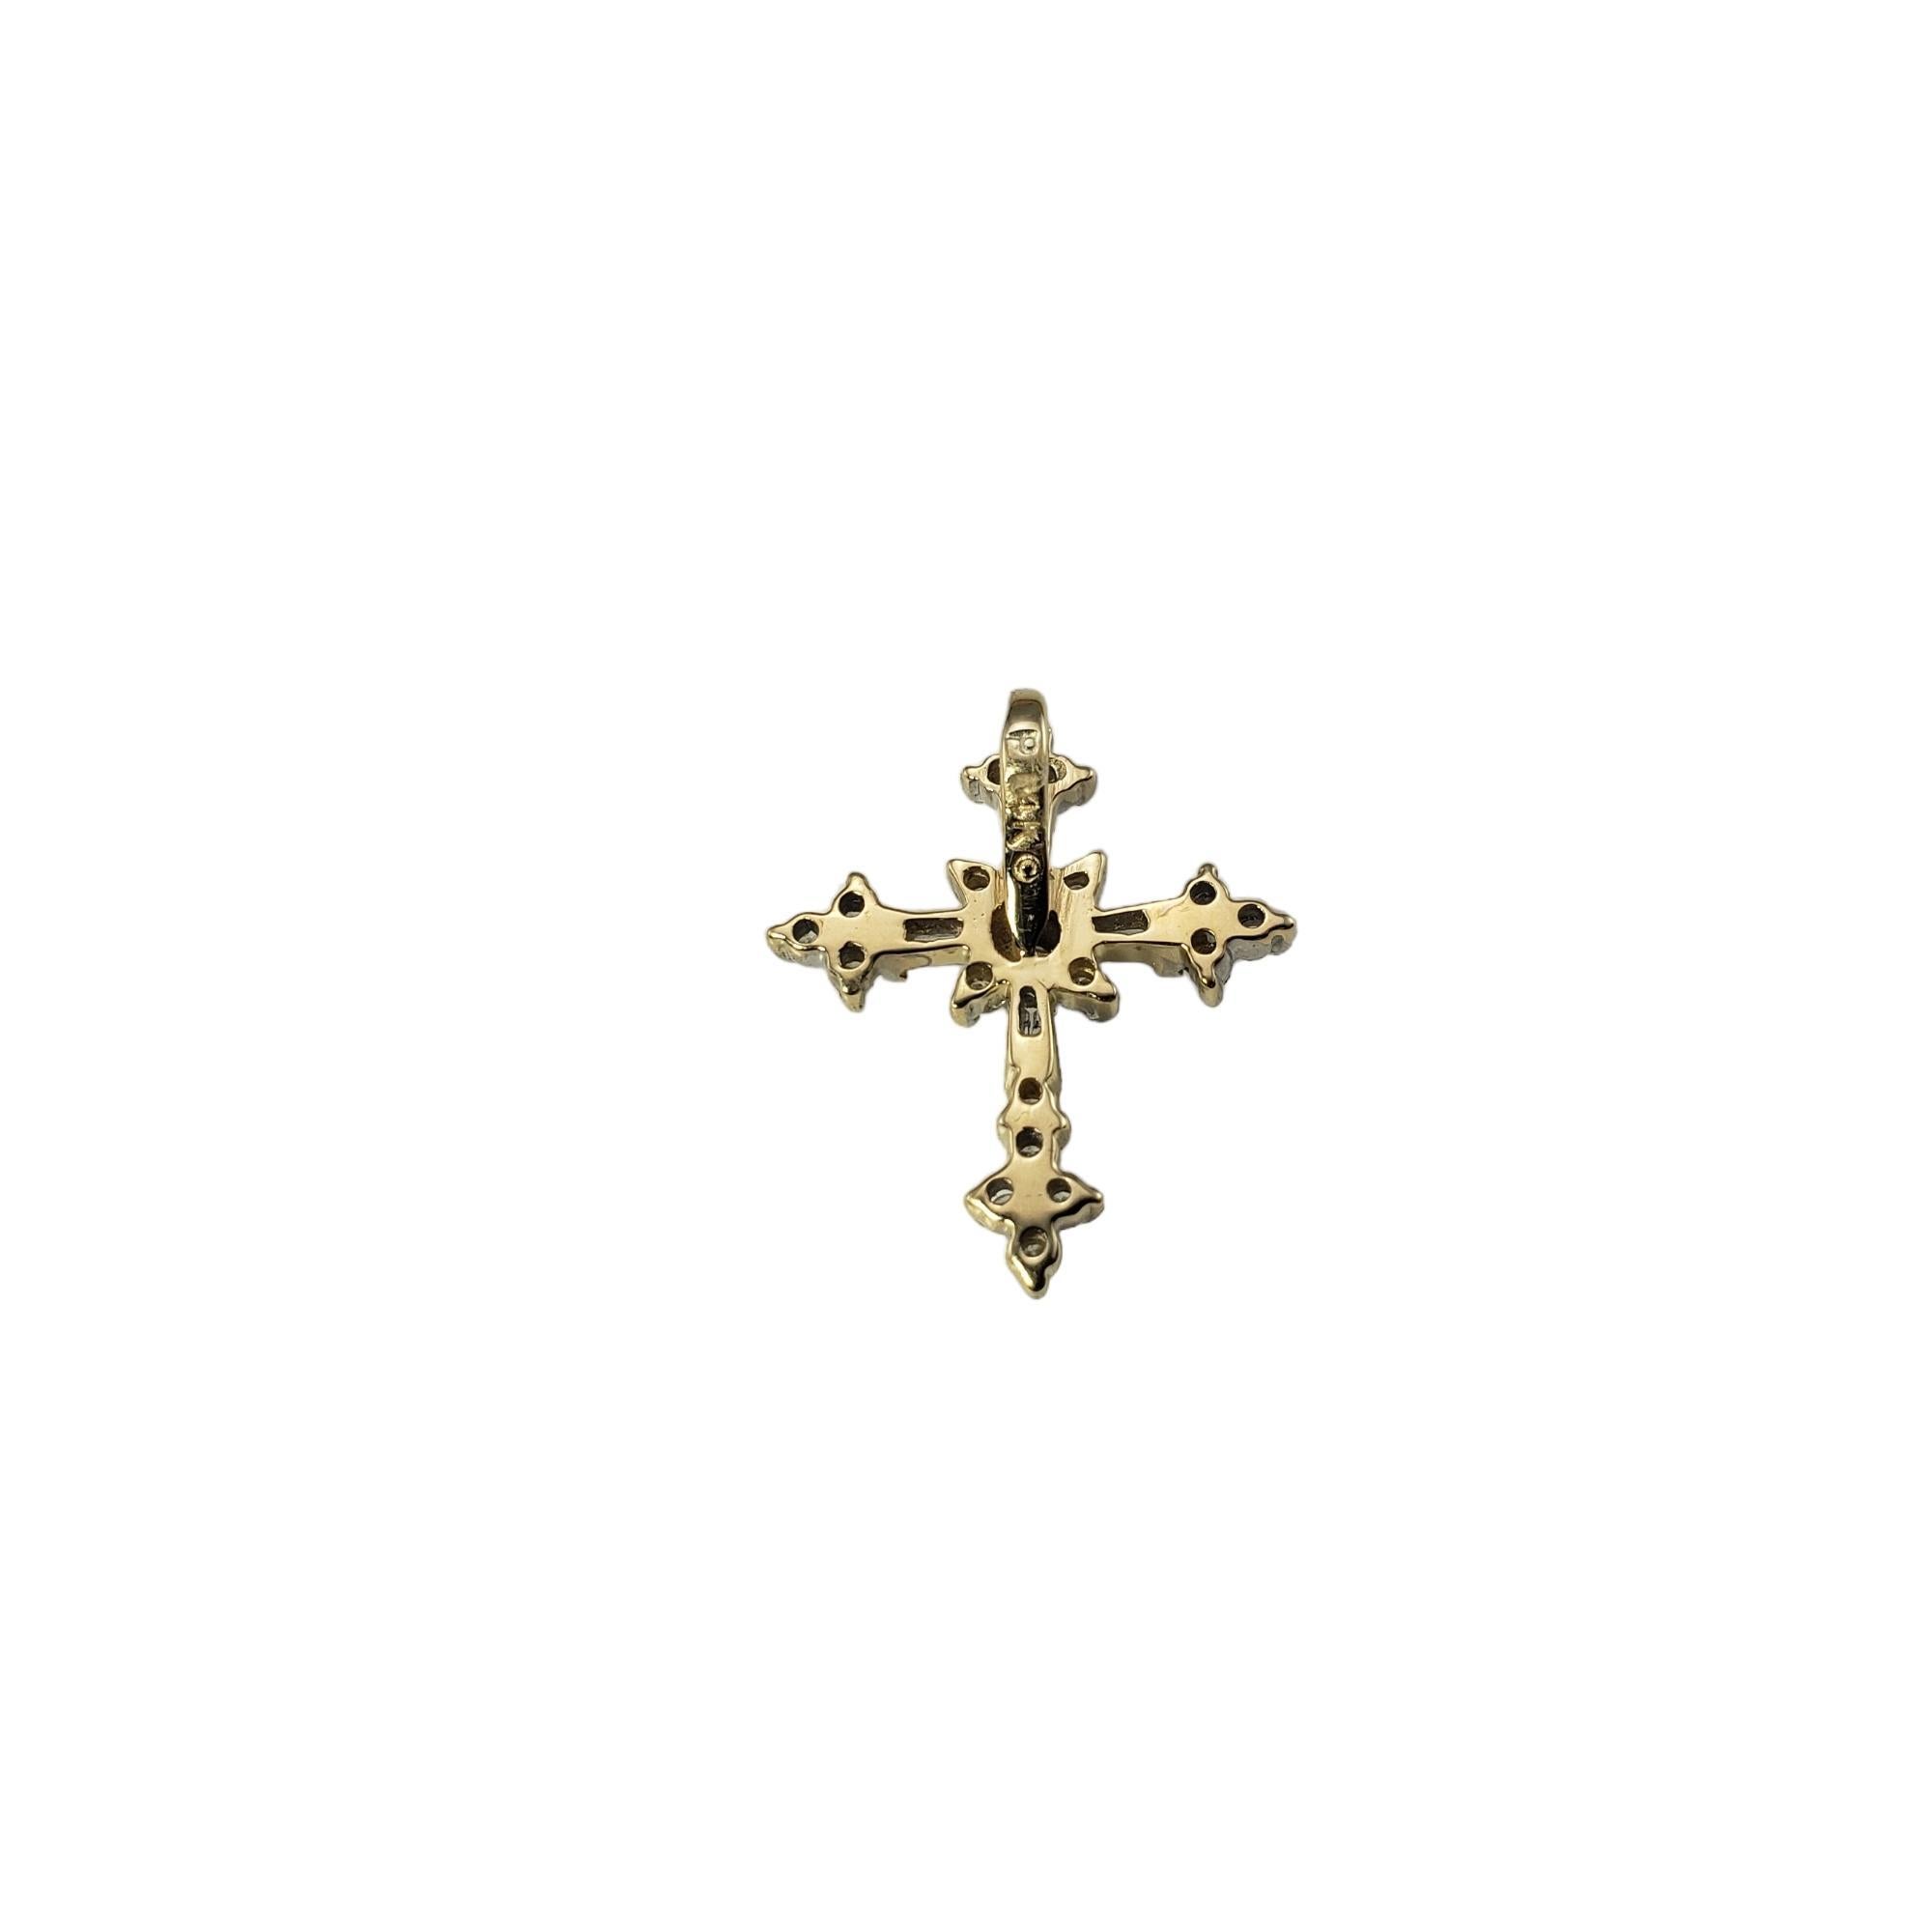 Vintage 14 Karat Yellow Gold and Diamond Cross Pendant #15298 In Good Condition For Sale In Washington Depot, CT